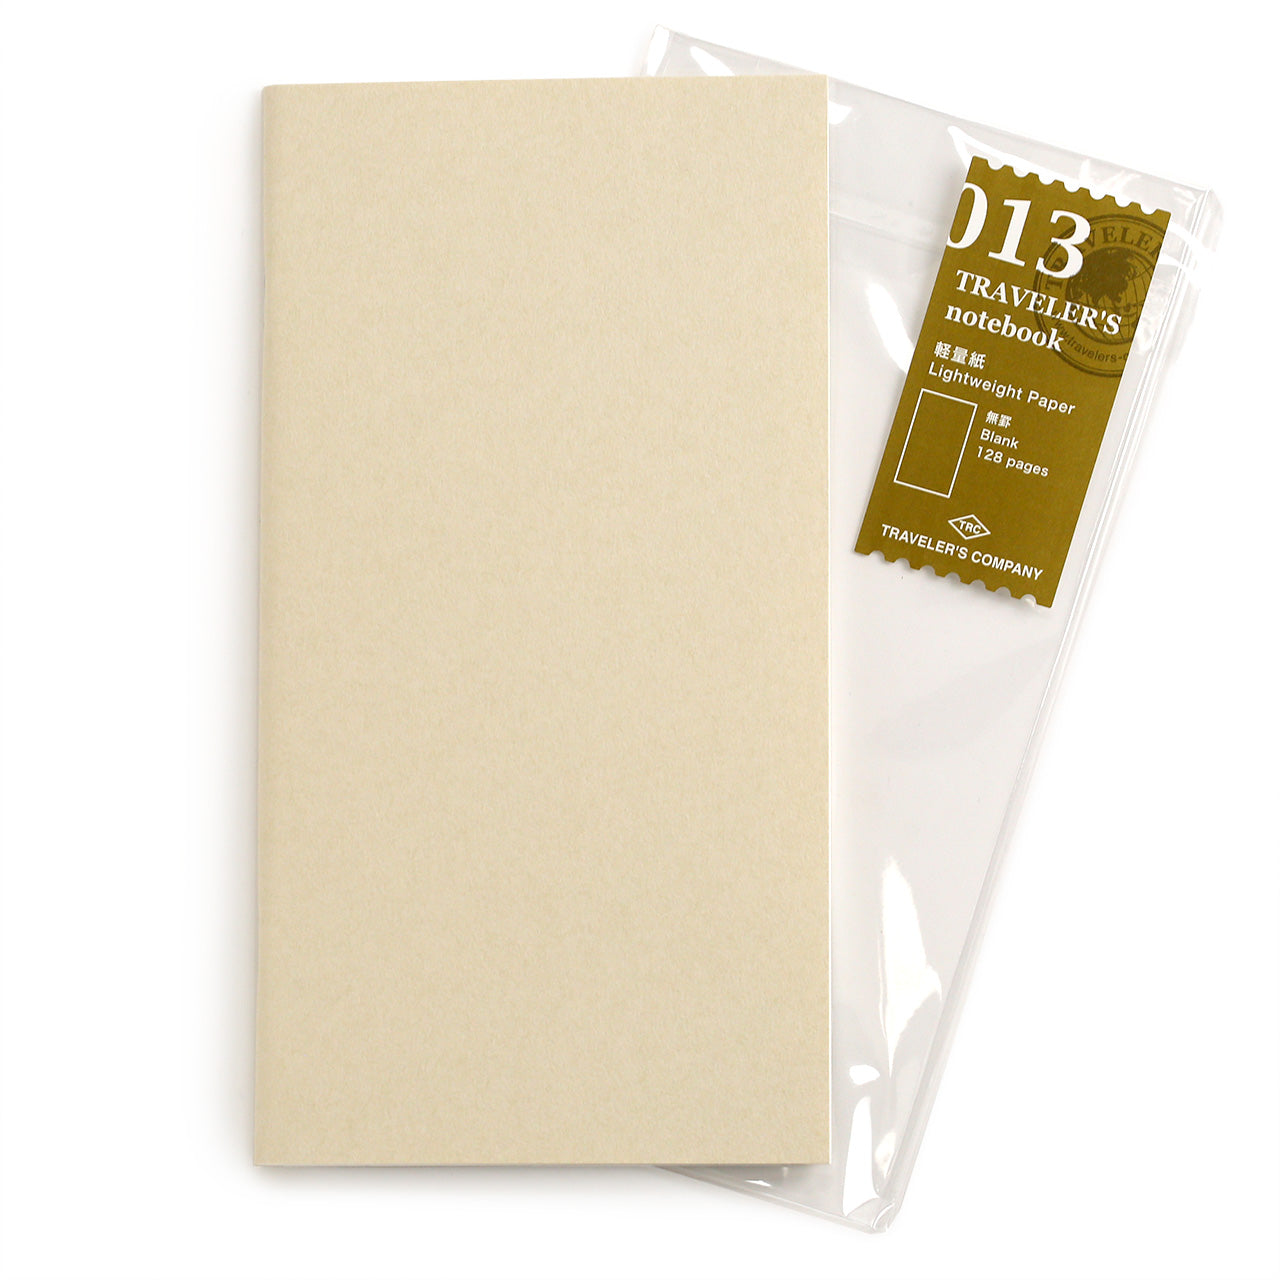 013 lightweight paper refill for regular traveler's notebook, showing the oatmeal coloured cover and olive green 013 label